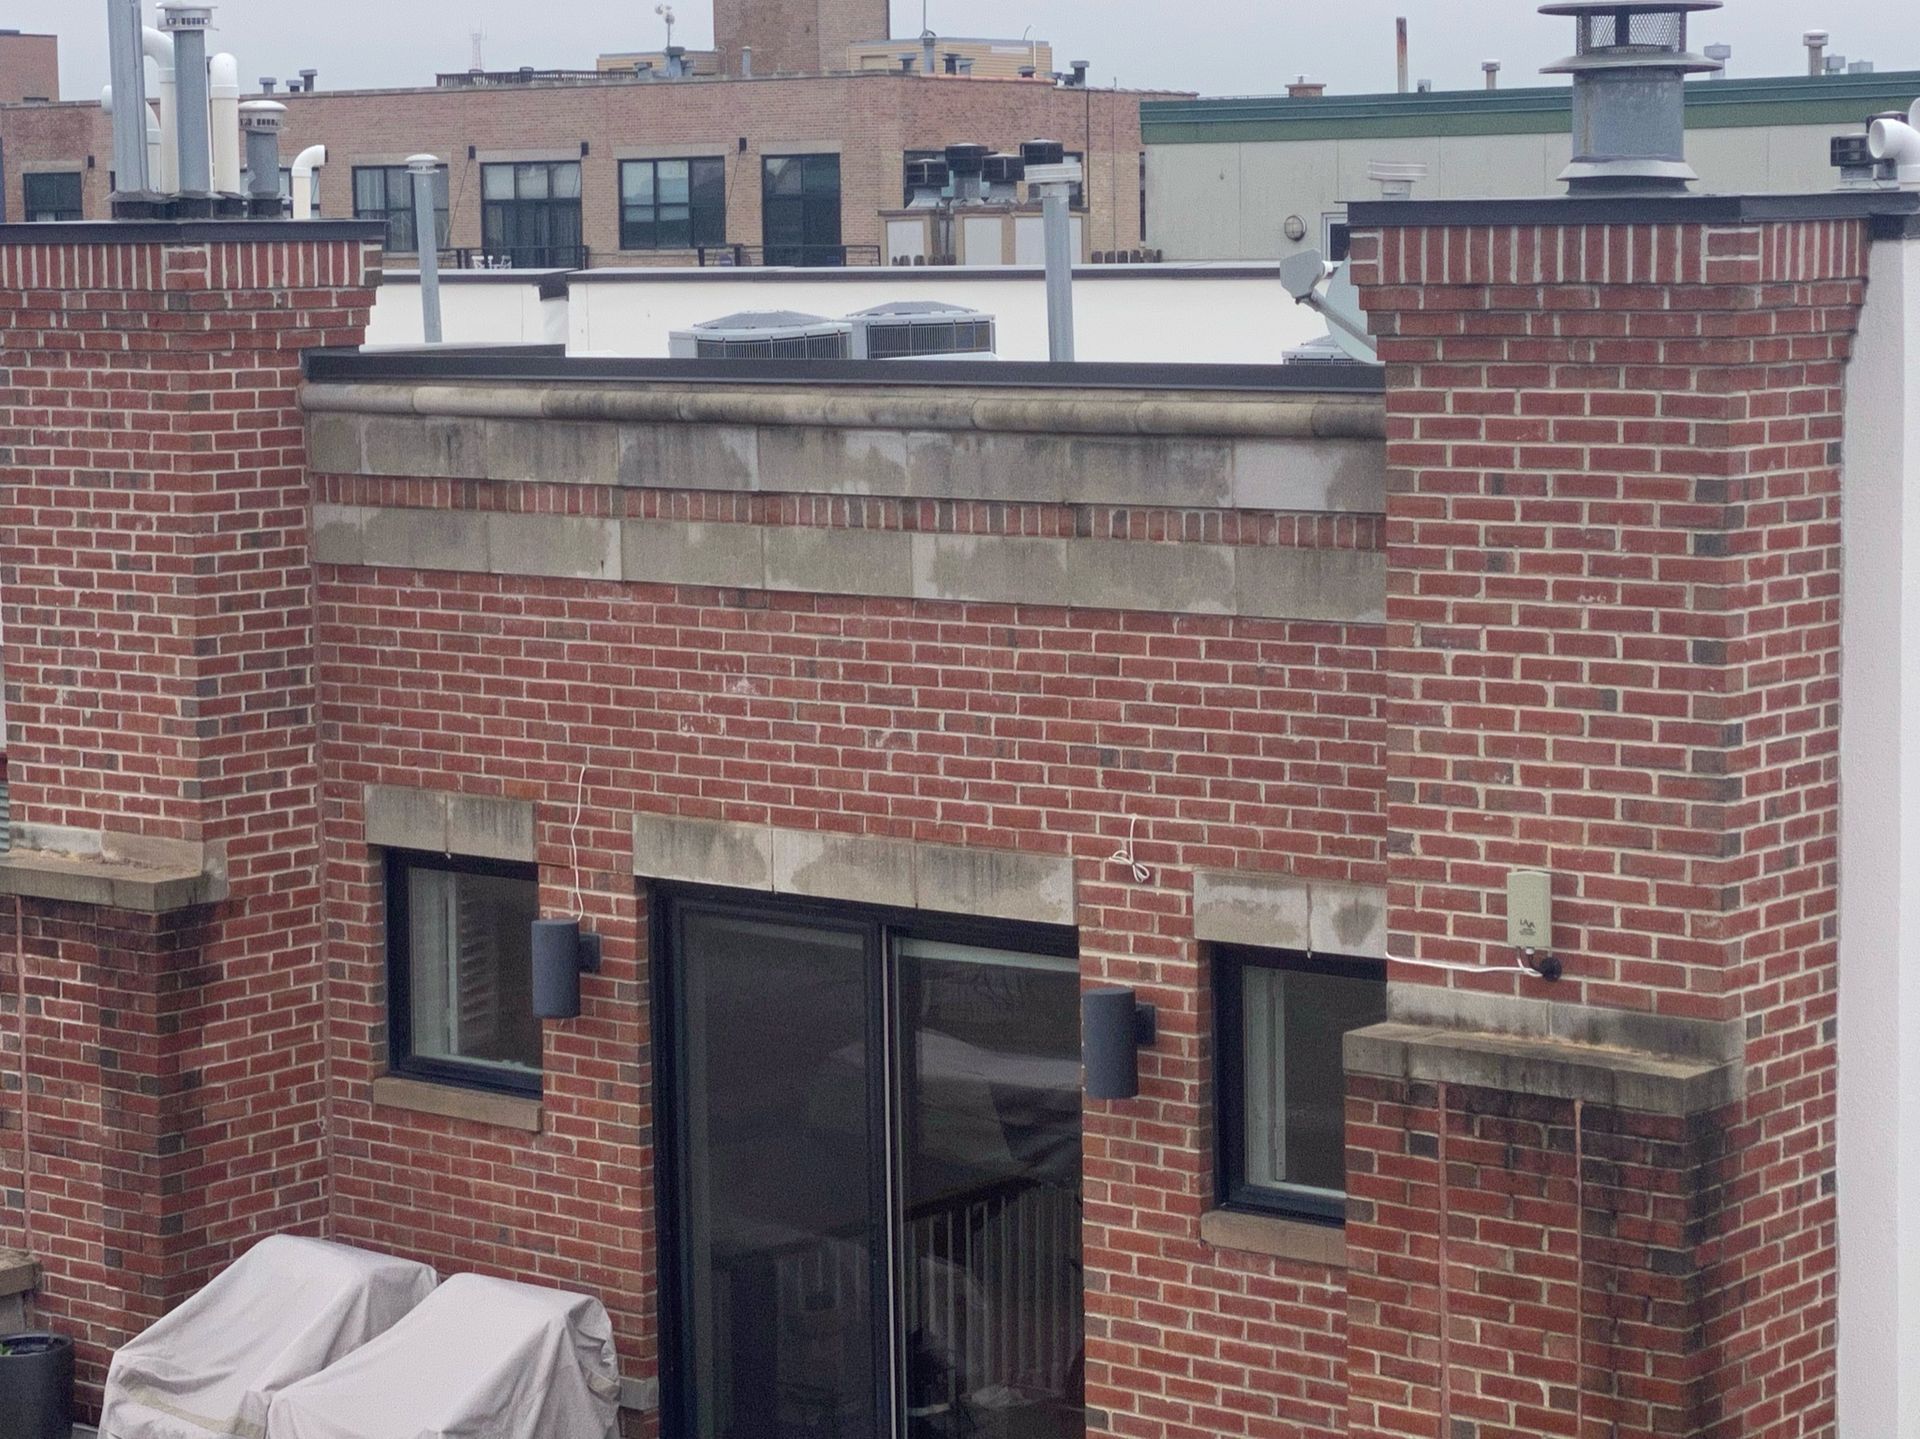 Wet parapet wall with Renaissance Stone in Lakeview, Chicago